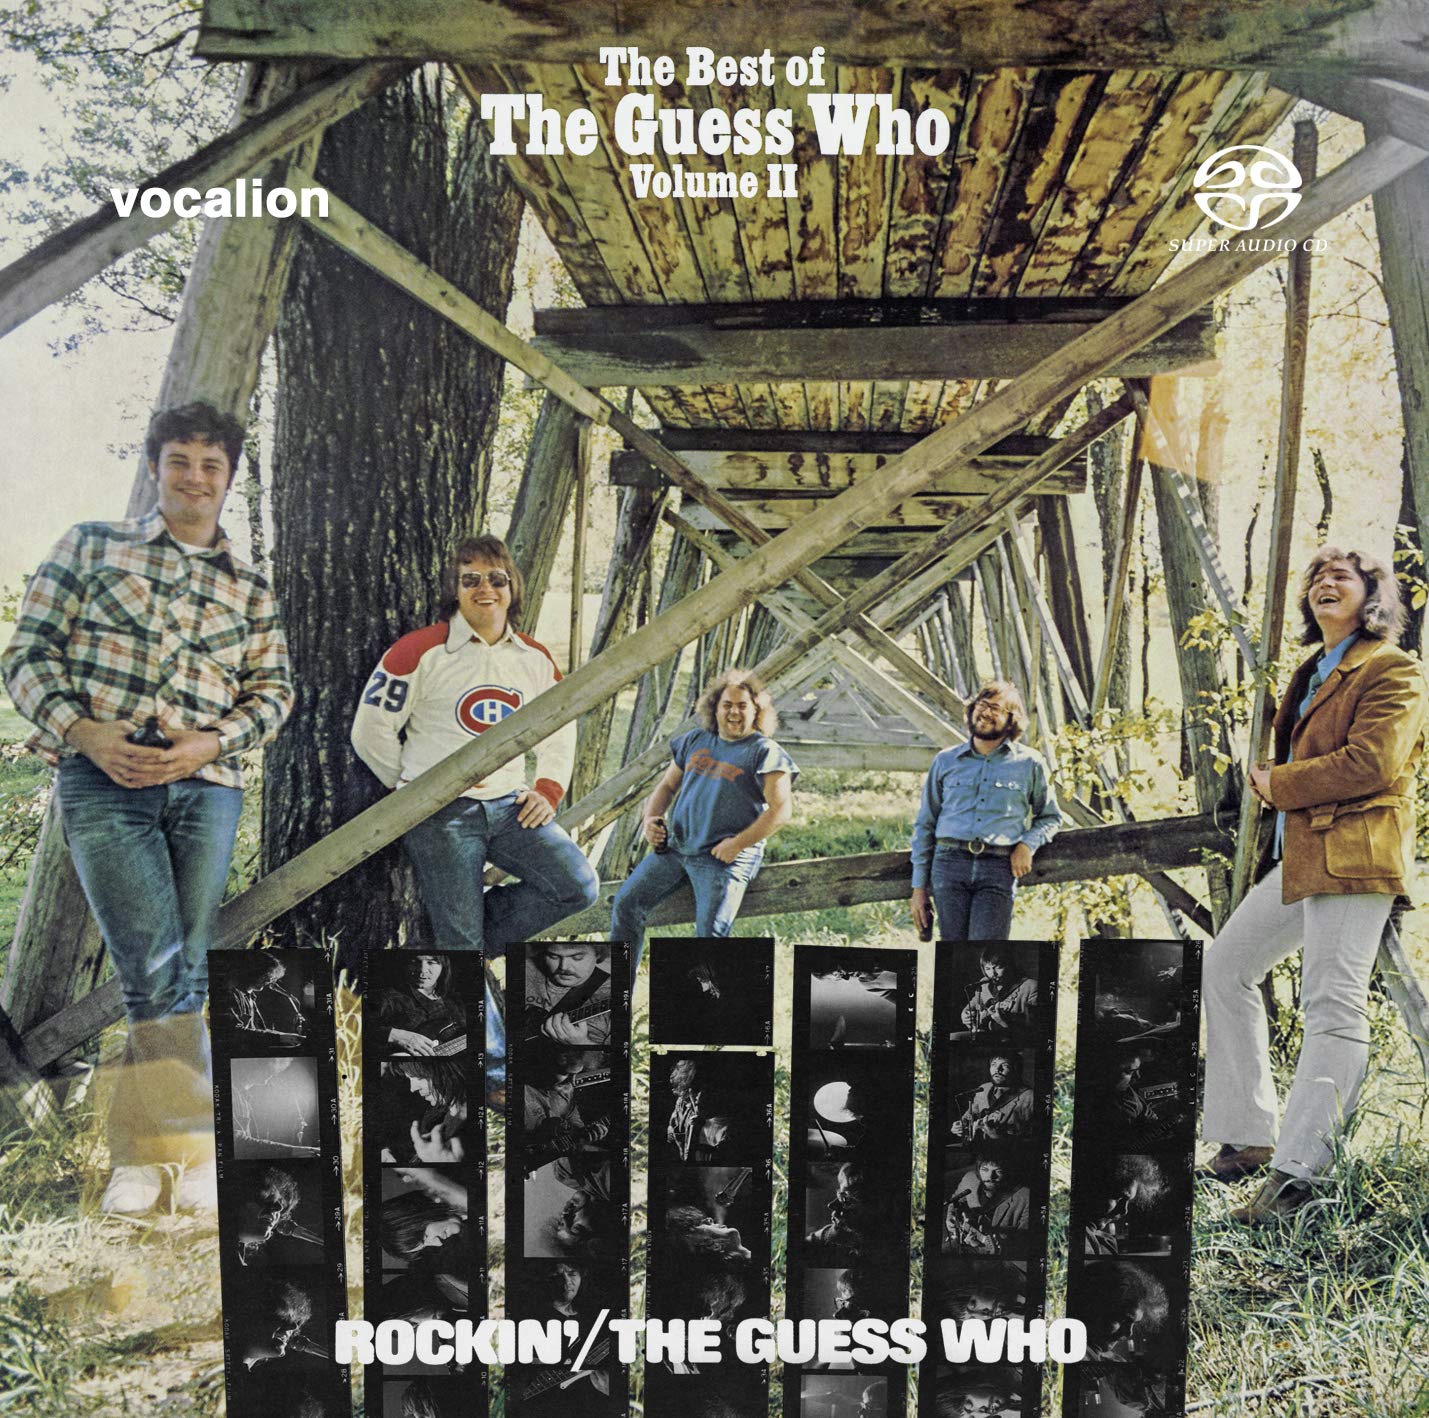 The Guess Who – Rockin’ & The Best Of The Guess Who Vol. 2 (1972+73) [Reissue 2019] MCH SACD ISO + Hi-Res FLAC